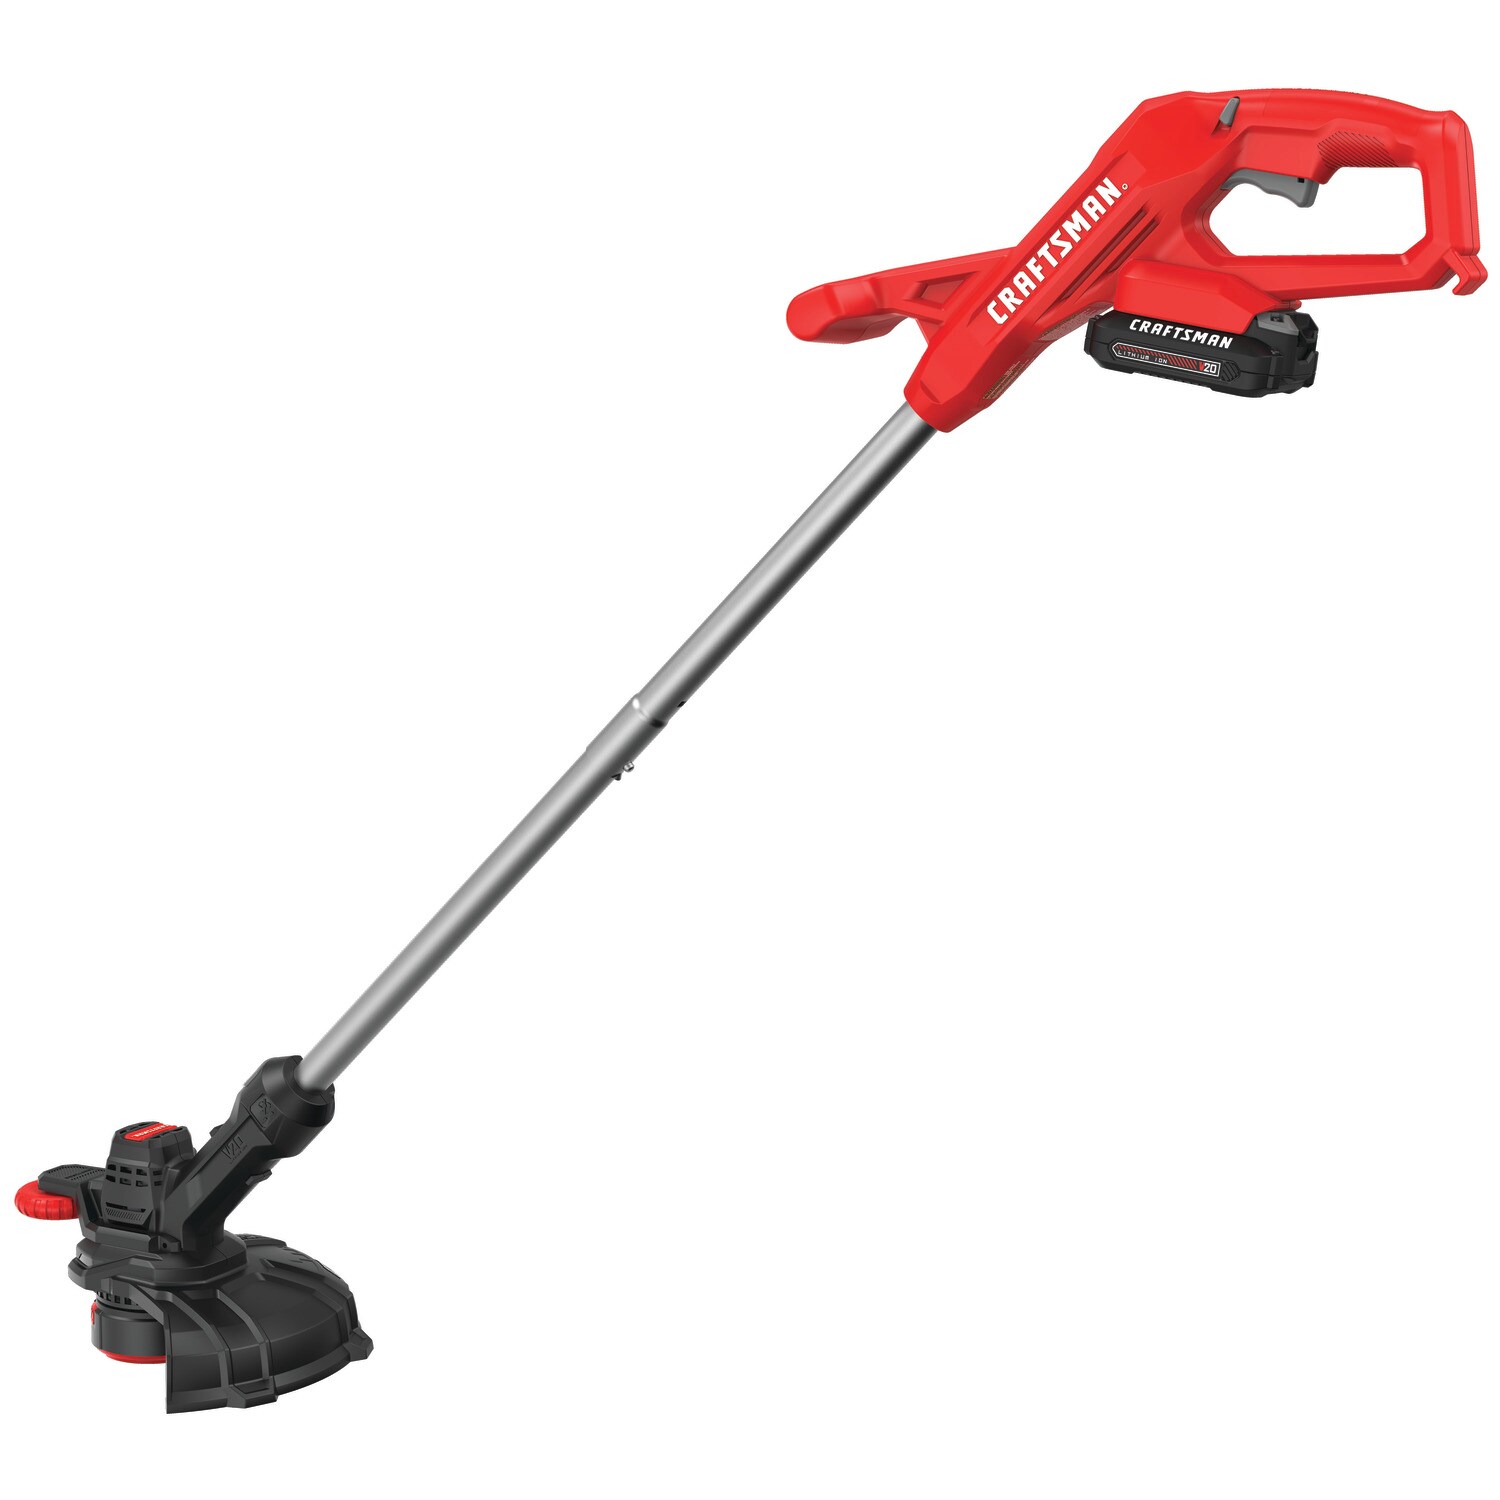 20 Volt Max* 10-Inch Cordless Grass Trimmer (Battery and Charger Inclu –  SENIX Tools